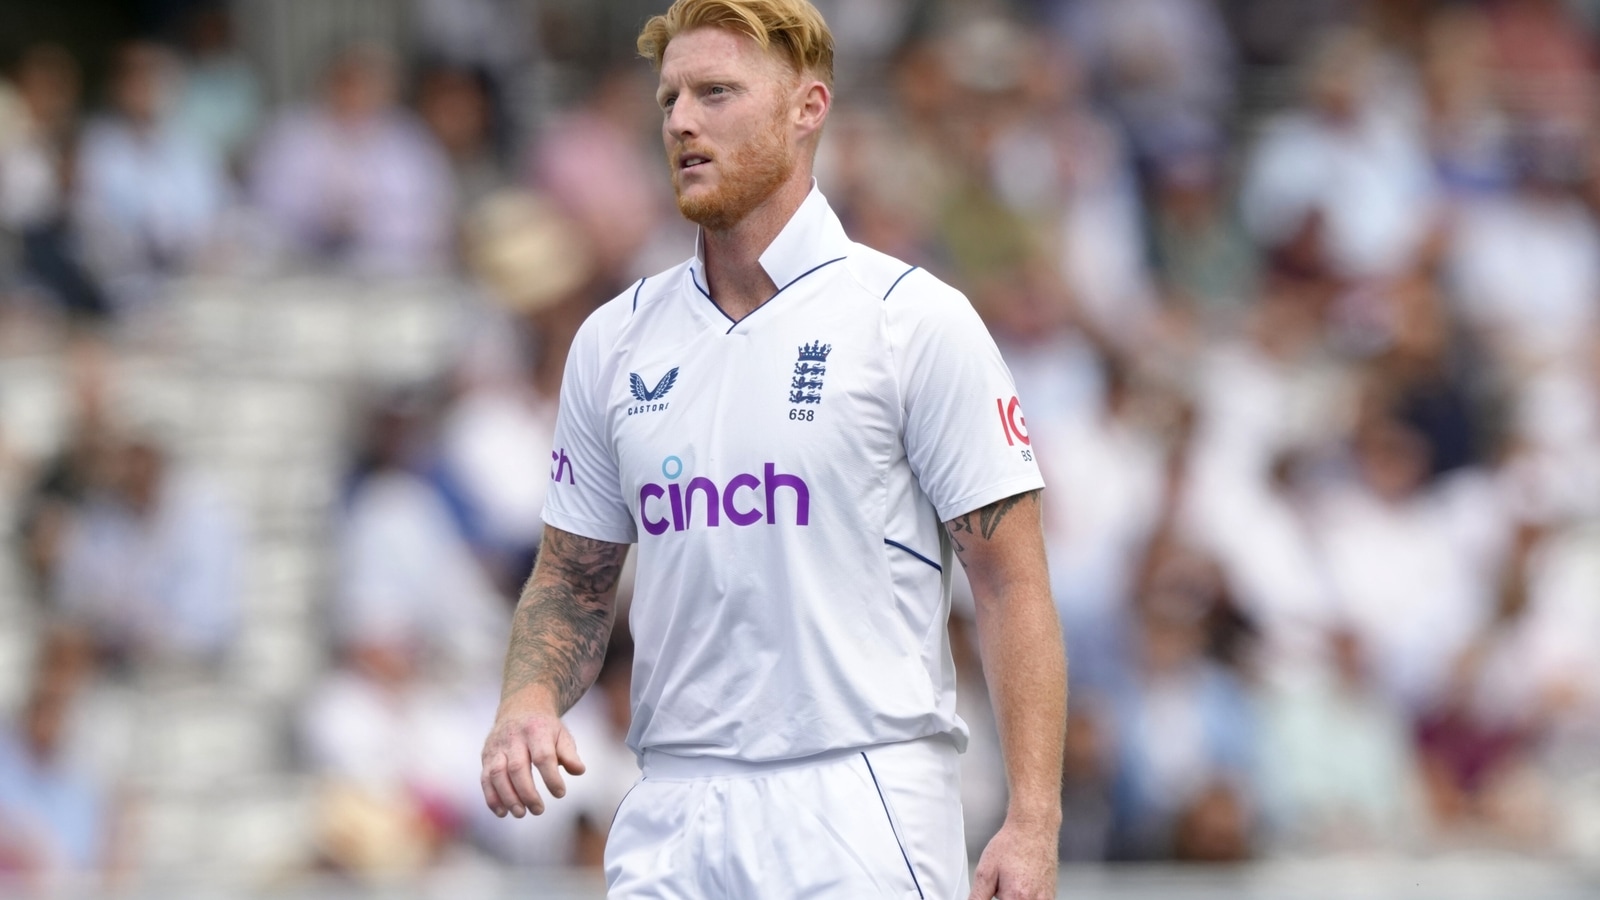 tap-him-on-shoulder-and-say-stop-bowling-like-that-because-ex-england-pacer-pinpoints-major-concern-over-stokes